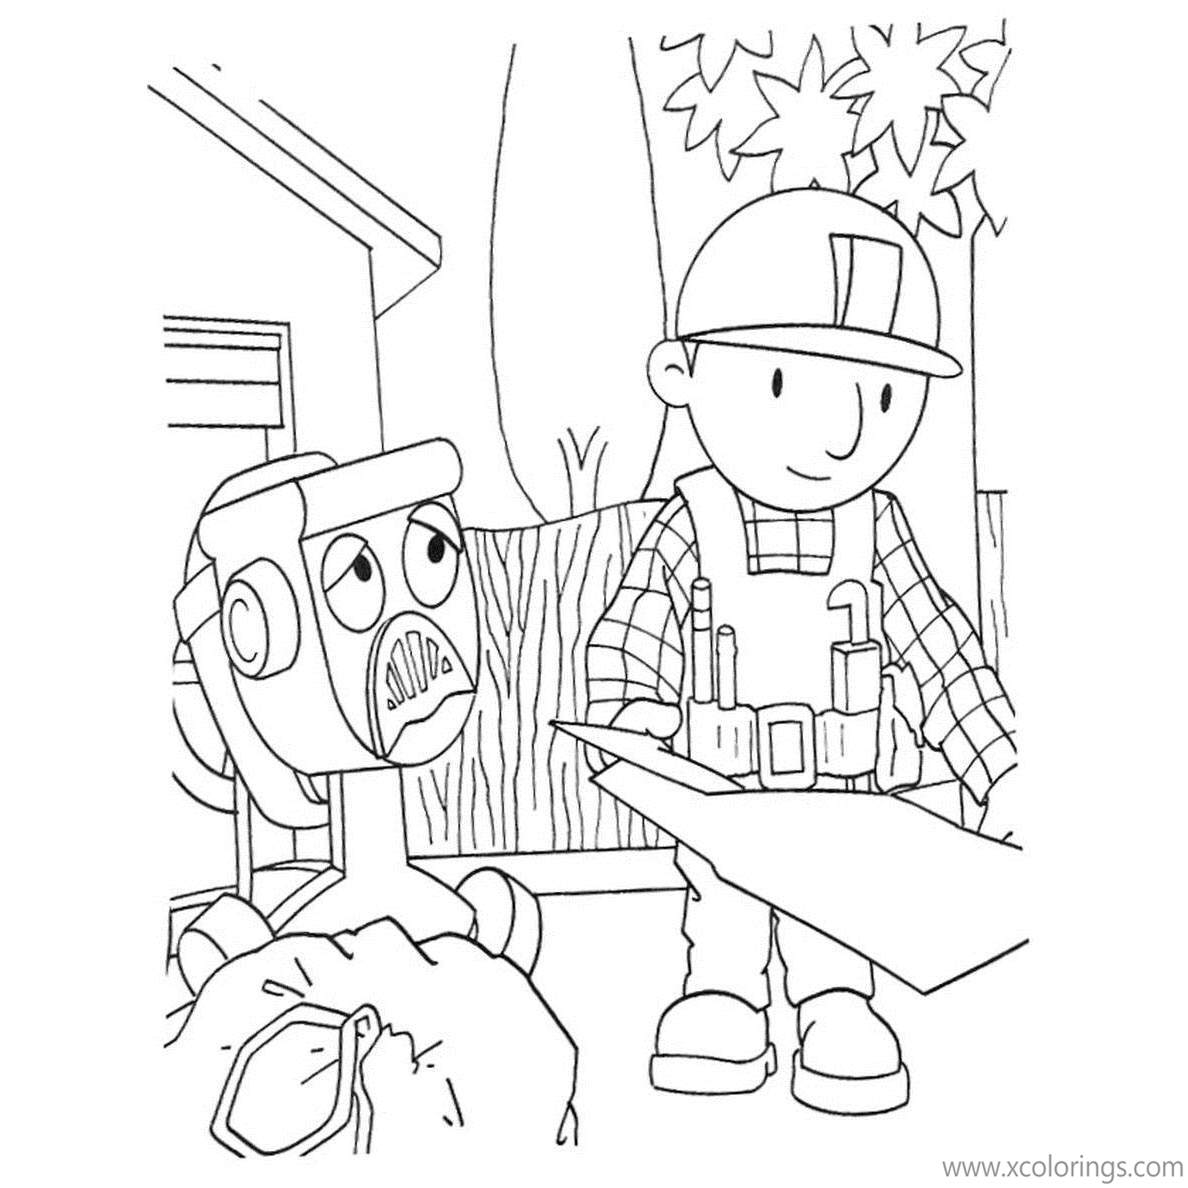 Free Bob The Builder Coloring Pages Dizzy is Sad printable